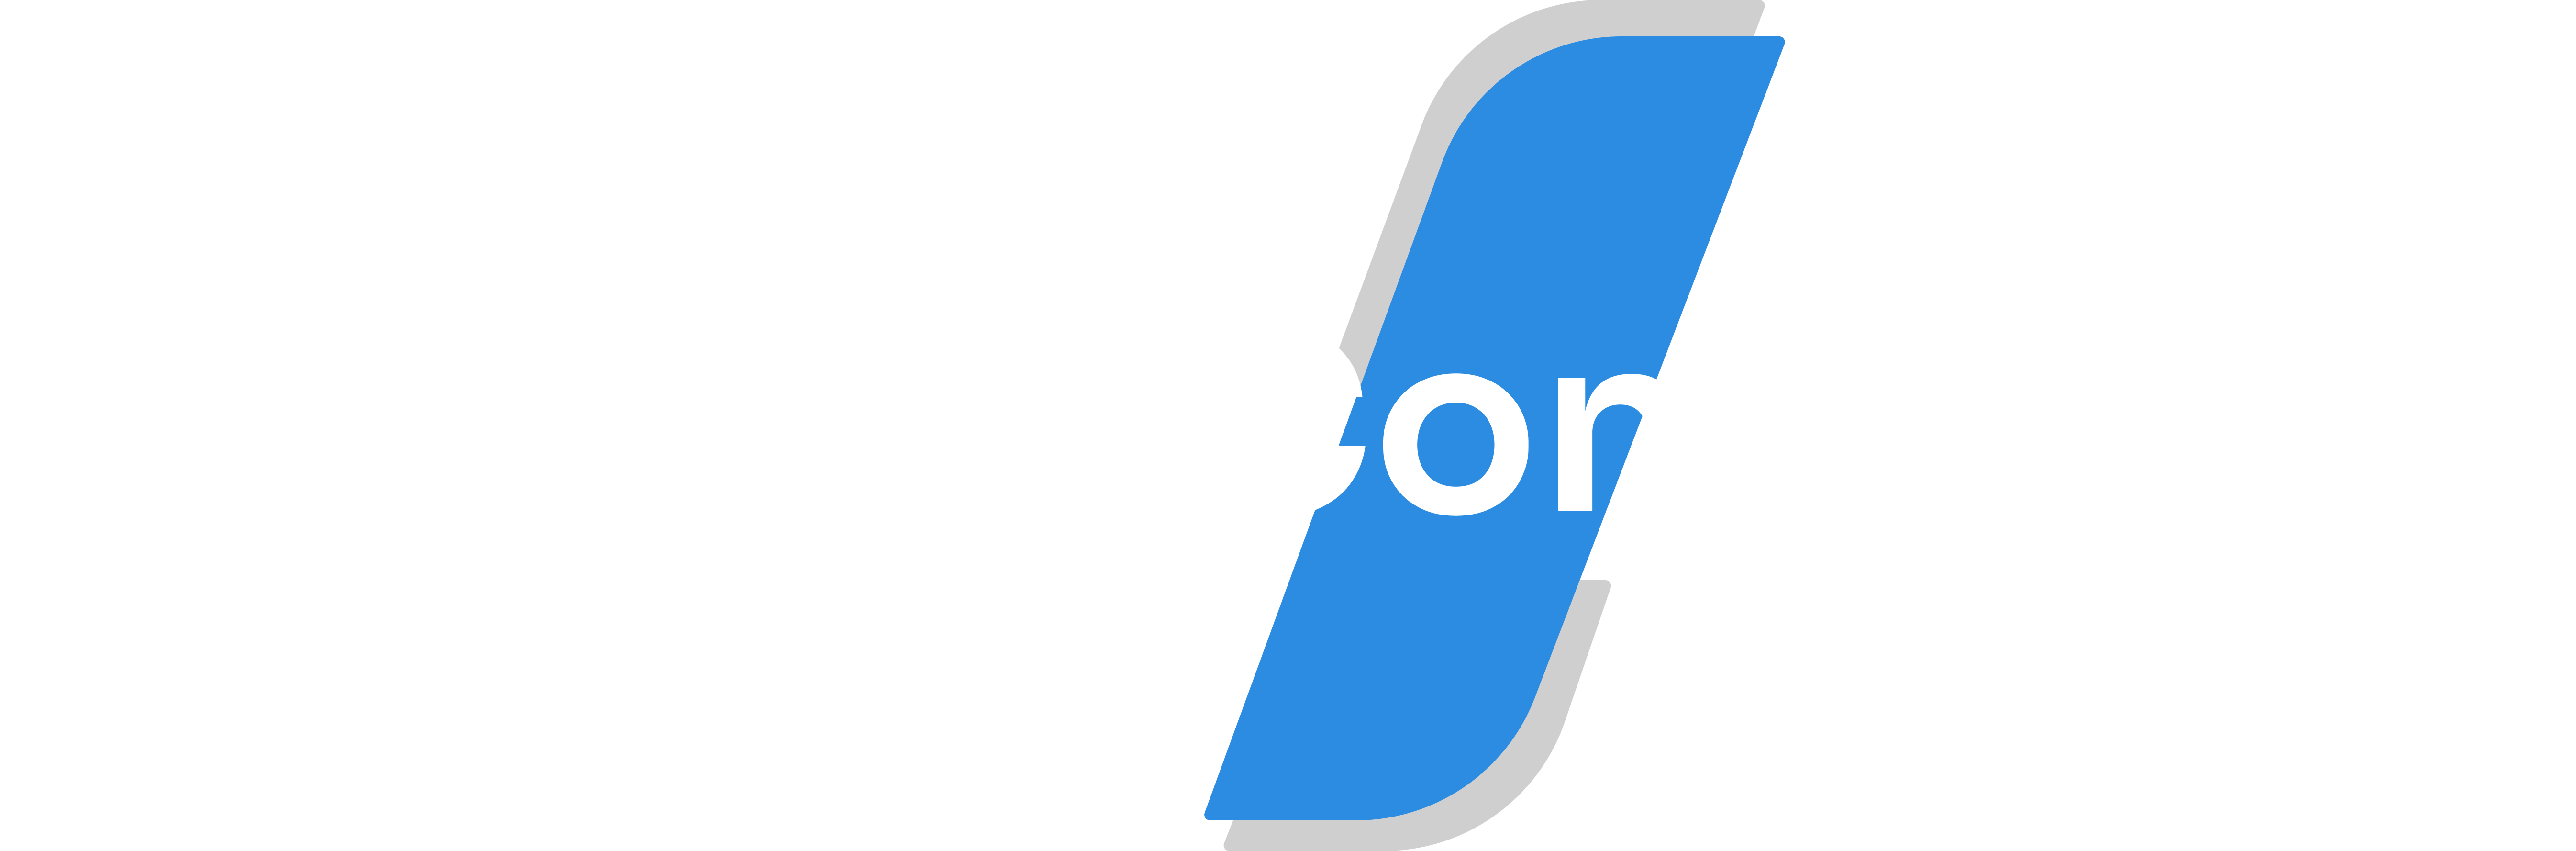 Harcourt Consulting